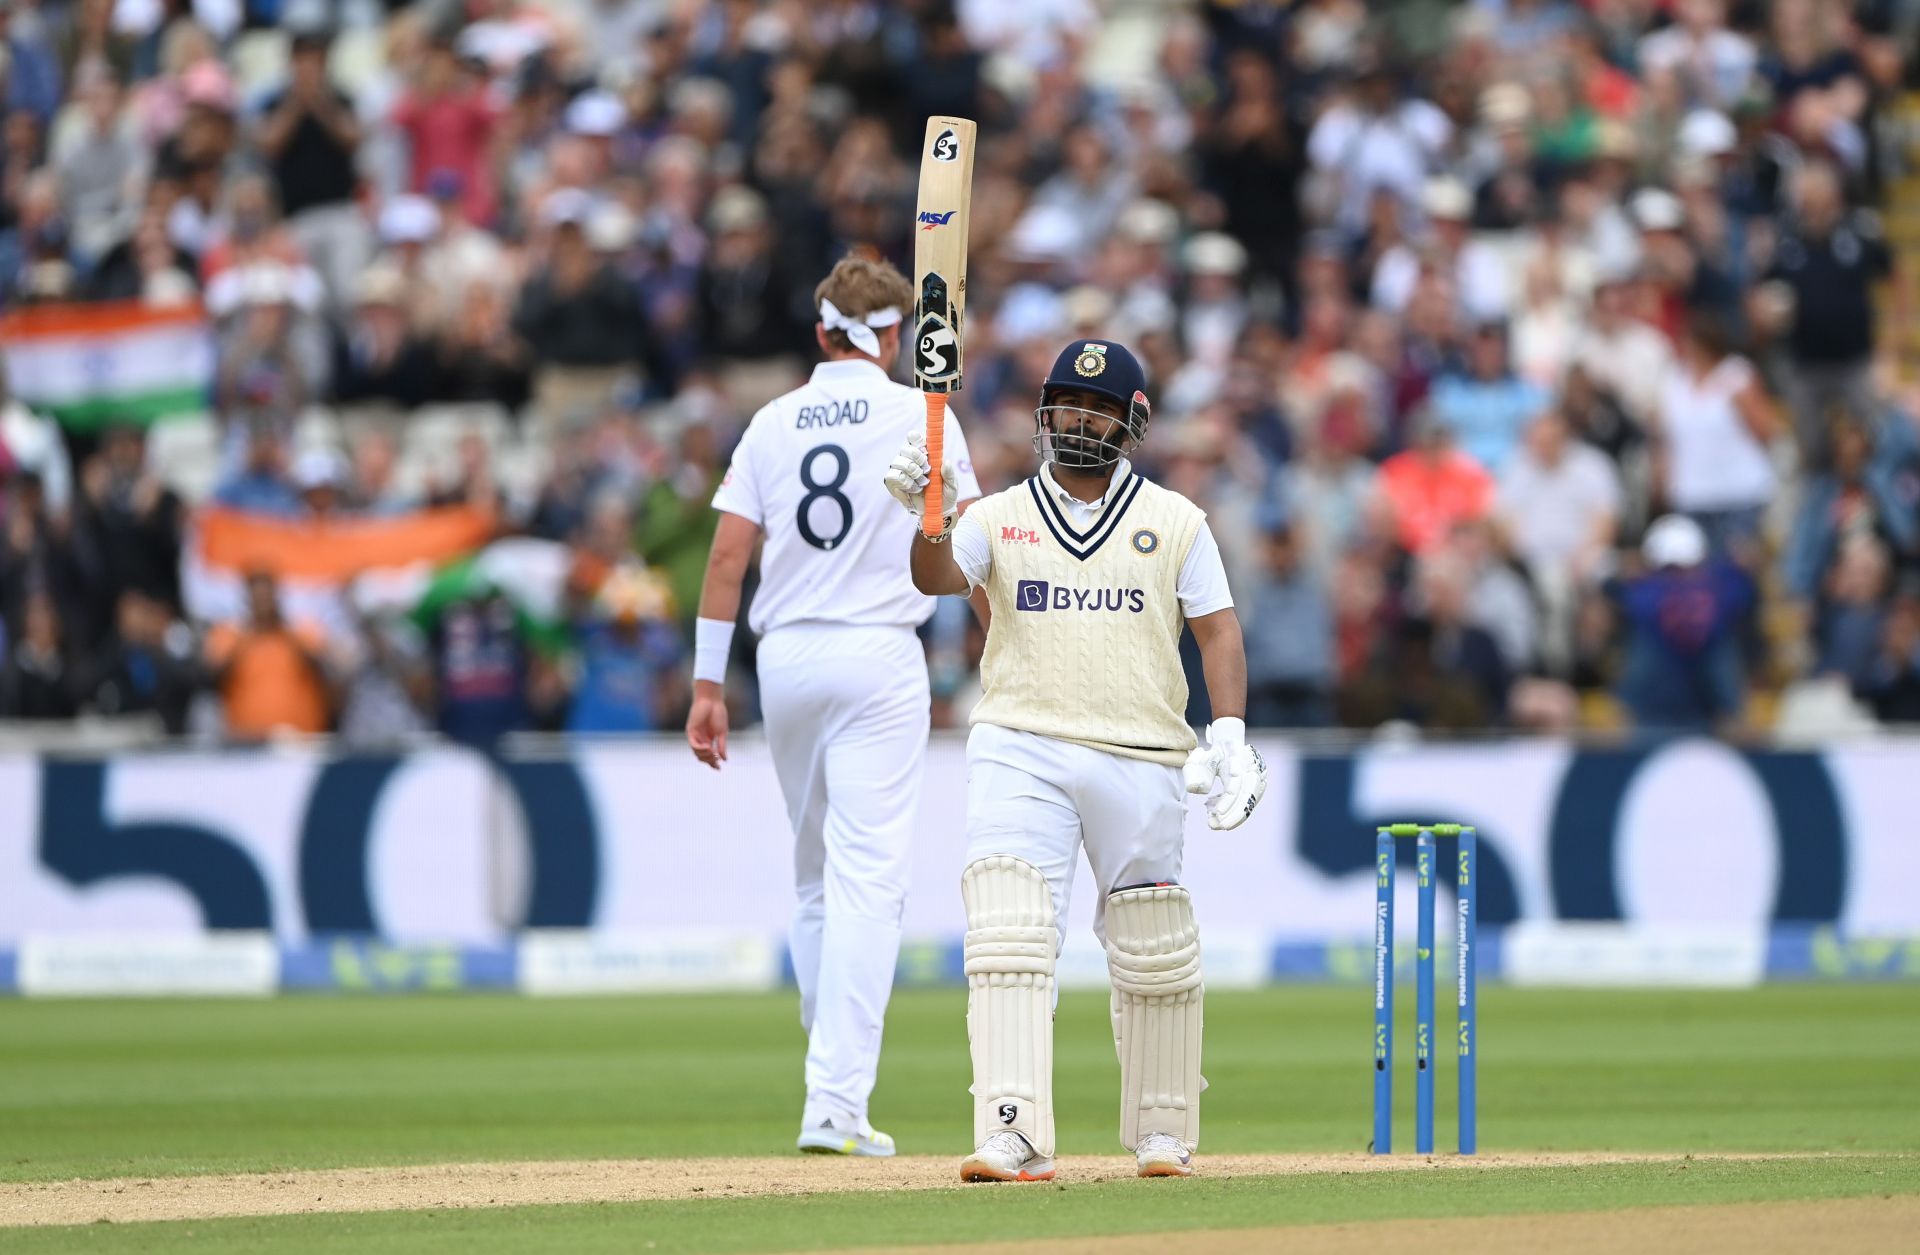 Rishabh Pant backed up his hundred with a fifty in the second innings at Edgbaston